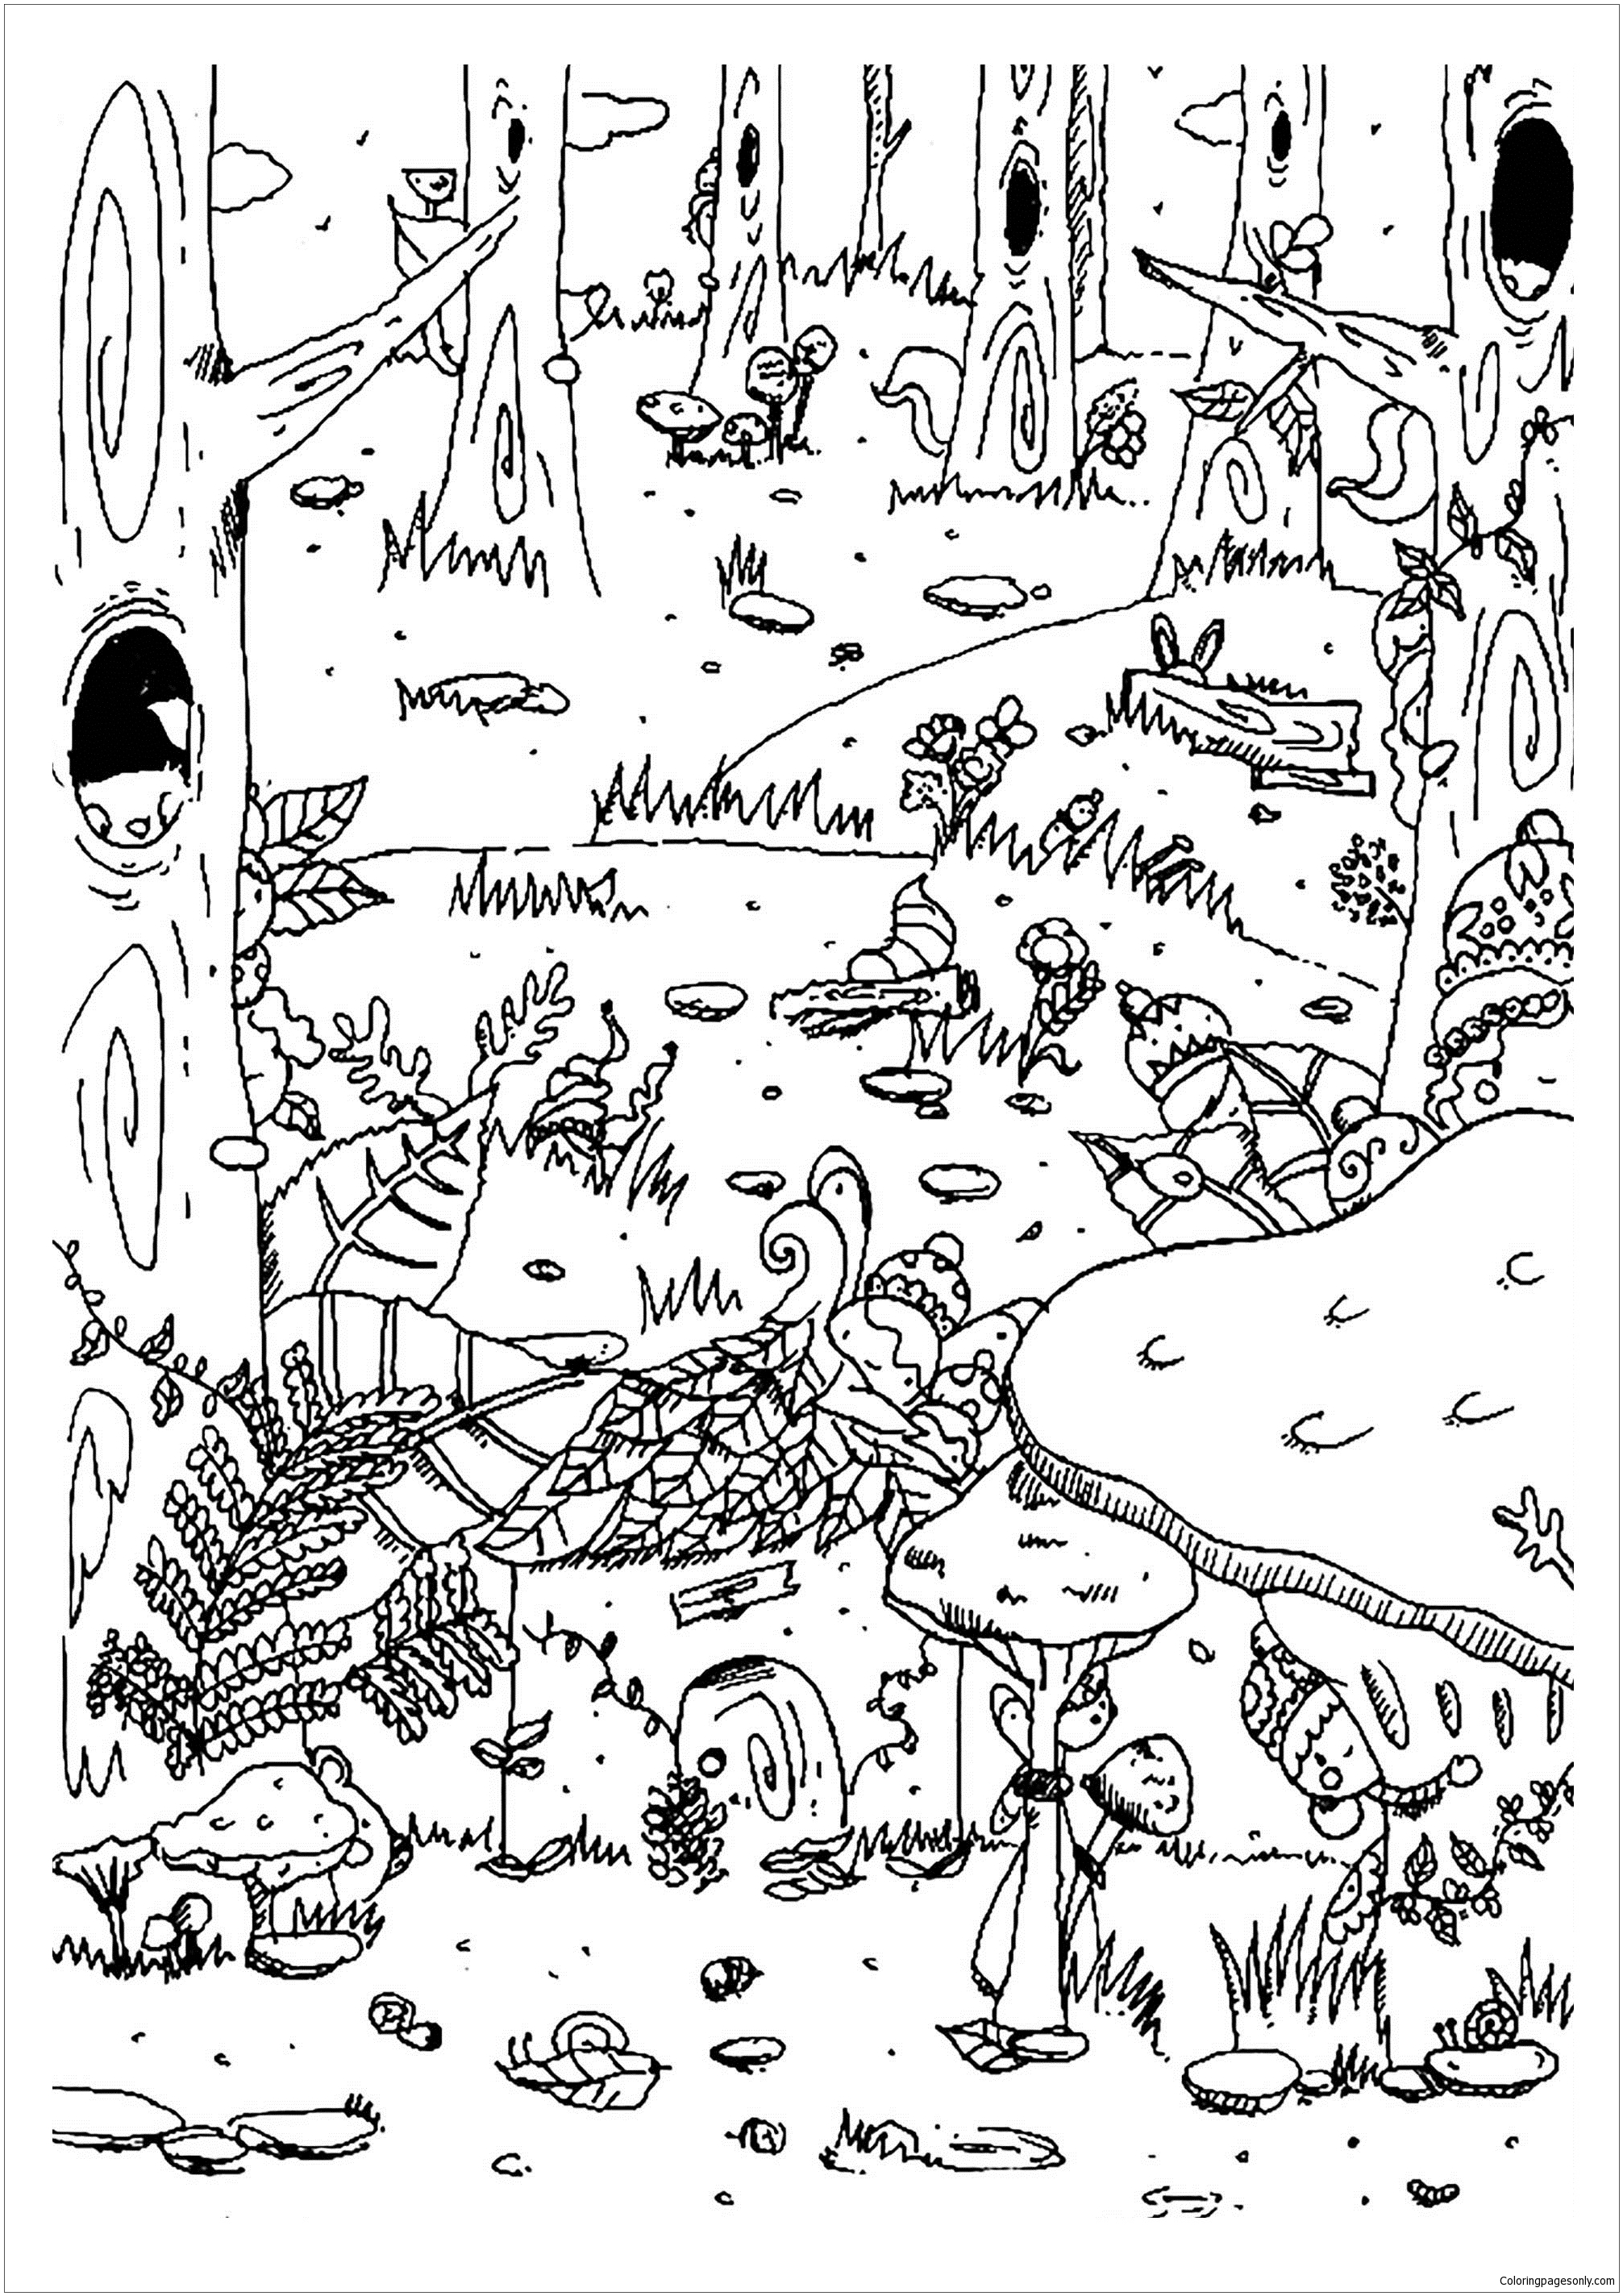 Enchanted forest Coloring Page Free Coloring Pages Online